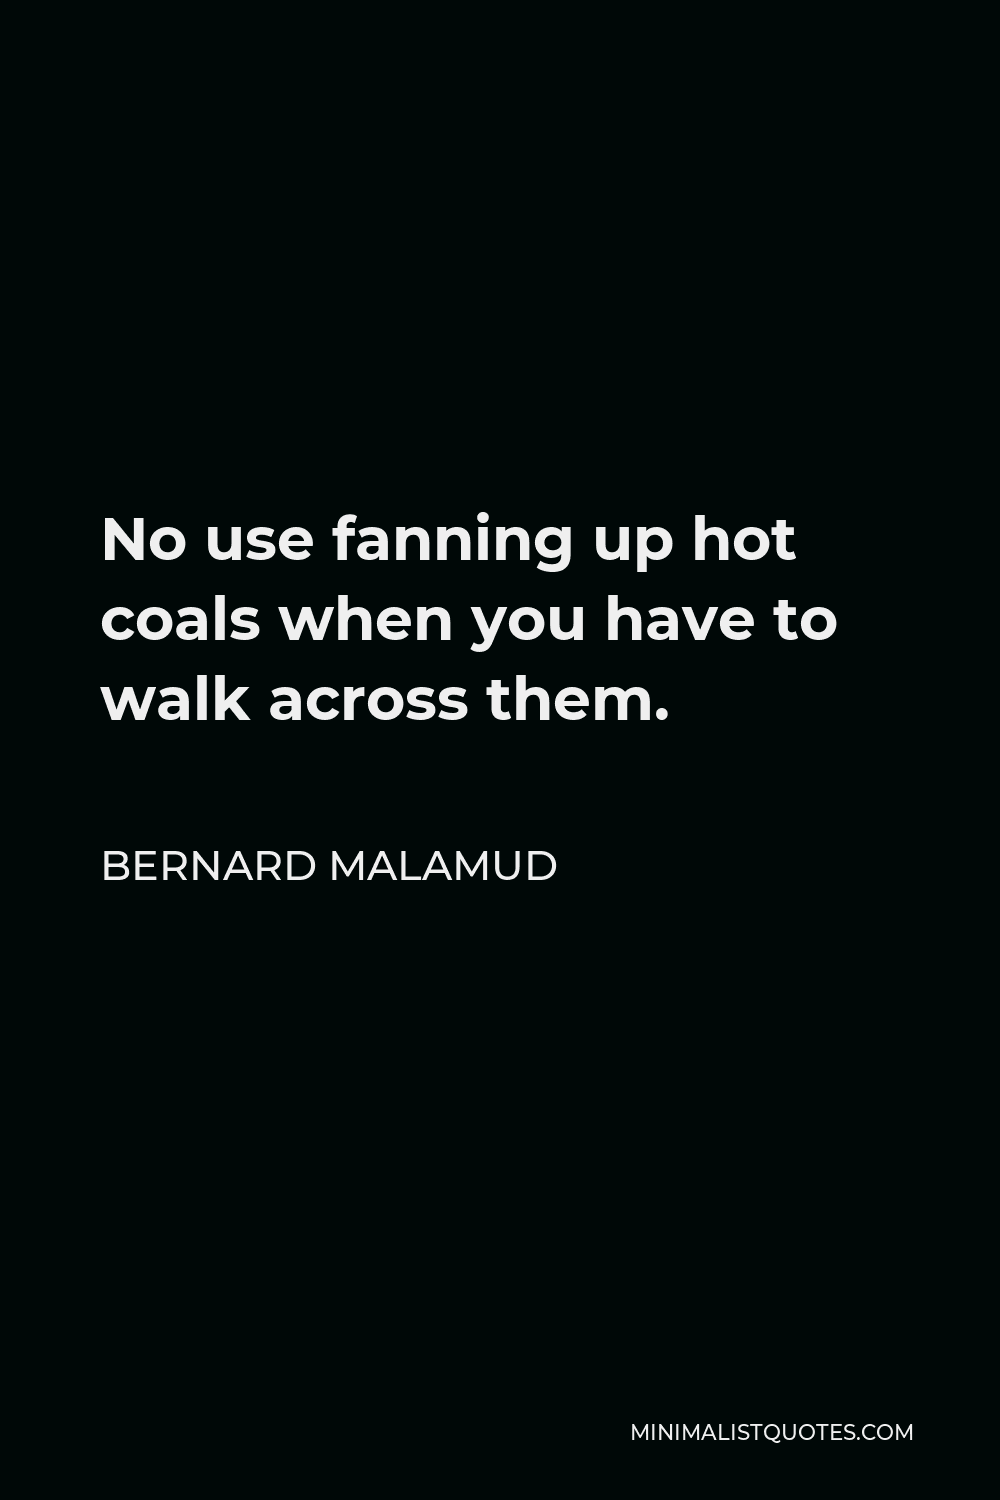 Bernard Malamud Quote - No use fanning up hot coals when you have to walk across them.